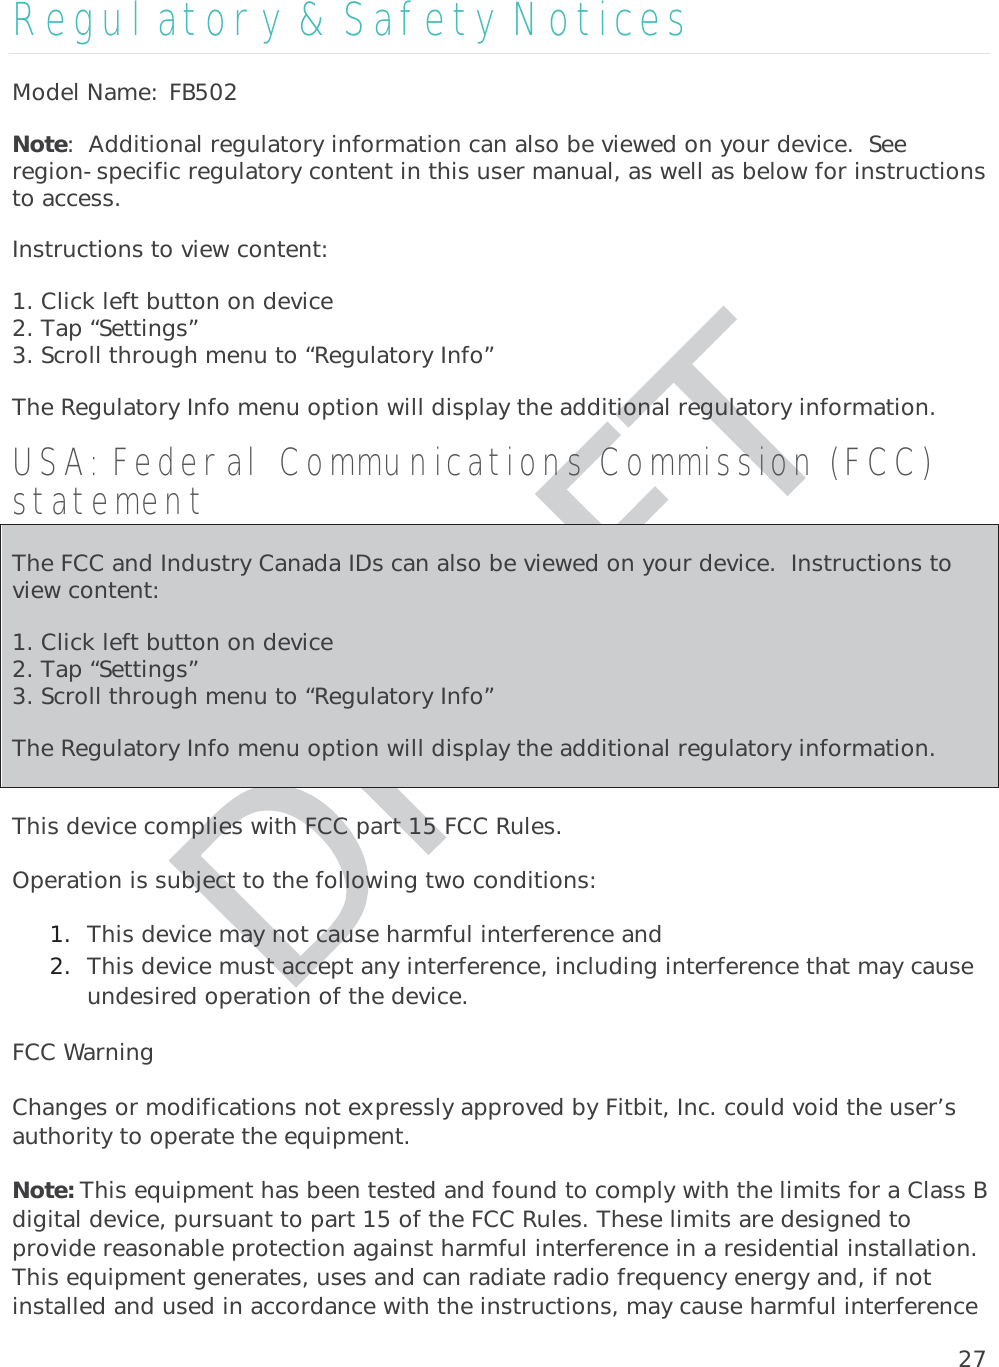 27Regulatory &amp; Safety Notices Model Name: FB502Note:  Additional regulatory information can also be viewed on your device.  See region-specific regulatory content in this user manual, as well as below for instructions to access. Instructions to view content: 1. Click left button on device 2. Tap “Settings” 3. Scroll through menu to “Regulatory Info” The Regulatory Info menu option will display the additional regulatory information. USA: Federal Communications Commission (FCC) statement The FCC and Industry Canada IDs can also be viewed on your device.  Instructions to view content: 1. Click left button on device2. Tap “Settings” 3. Scroll through menu to “Regulatory Info” The Regulatory Info menu option will display the additional regulatory information. This device complies with FCC part 15 FCC Rules. Operation is subject to the following two conditions: 1. This device may not cause harmful interference and 2. This device must accept any interference, including interference that may cause undesired operation of the device. FCC Warning Changes or modifications not expressly approved by Fitbit, Inc. could void the user’s authority to operate the equipment. Note: This equipment has been tested and found to comply with the limits for a Class B digital device, pursuant to part 15 of the FCC Rules. These limits are designed to provide reasonable protection against harmful interference in a residential installation. This equipment generates, uses and can radiate radio frequency energy and, if not installed and used in accordance with the instructions, may cause harmful interference 